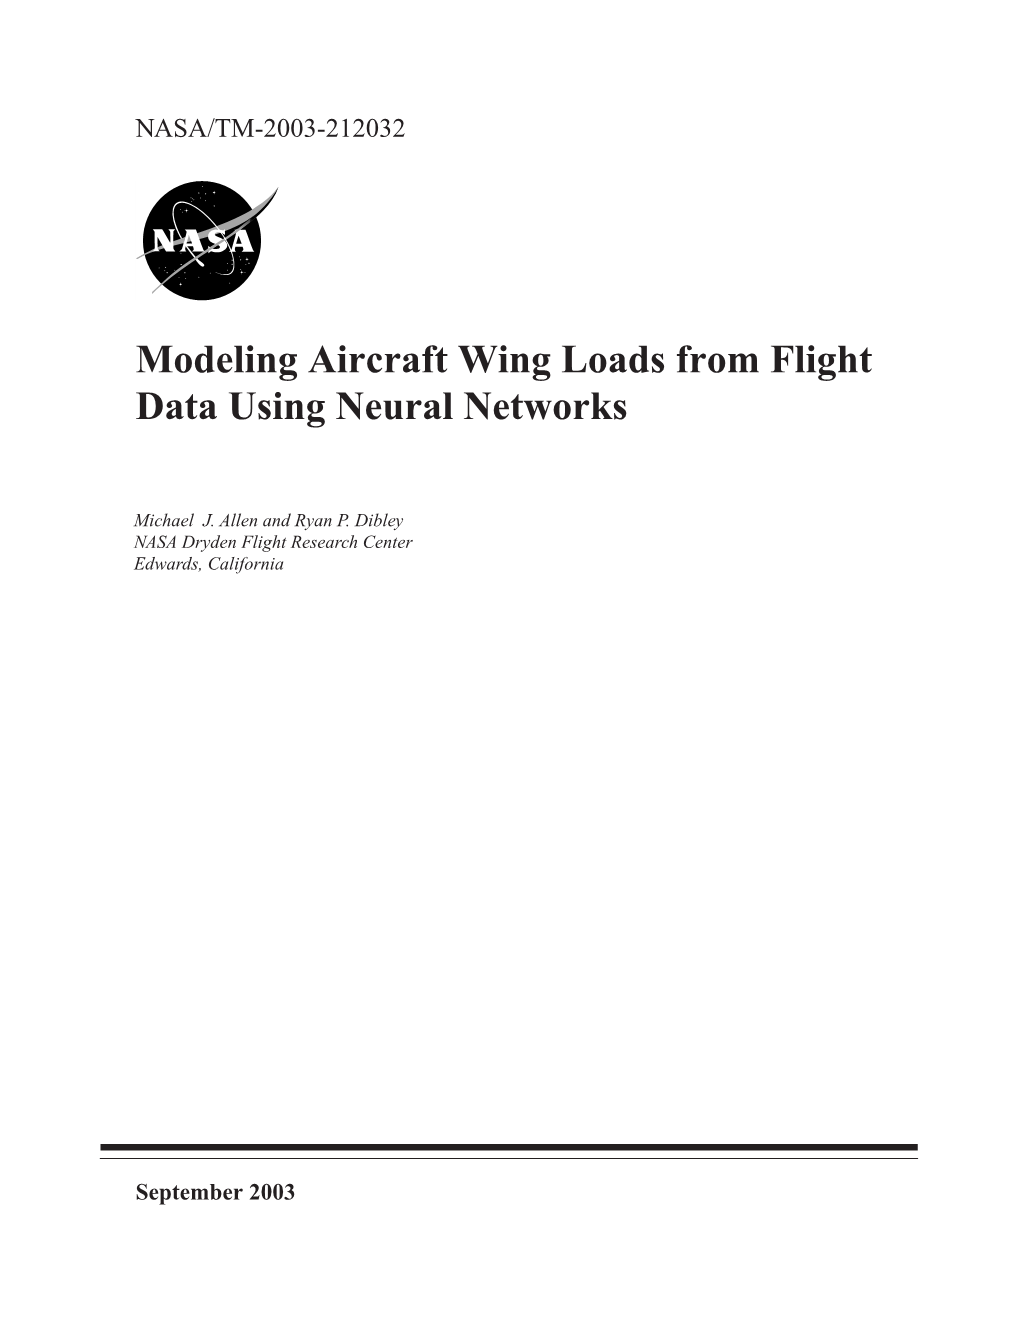 Modeling Aircraft Wing Loads from Flight Data Using Neural Networks